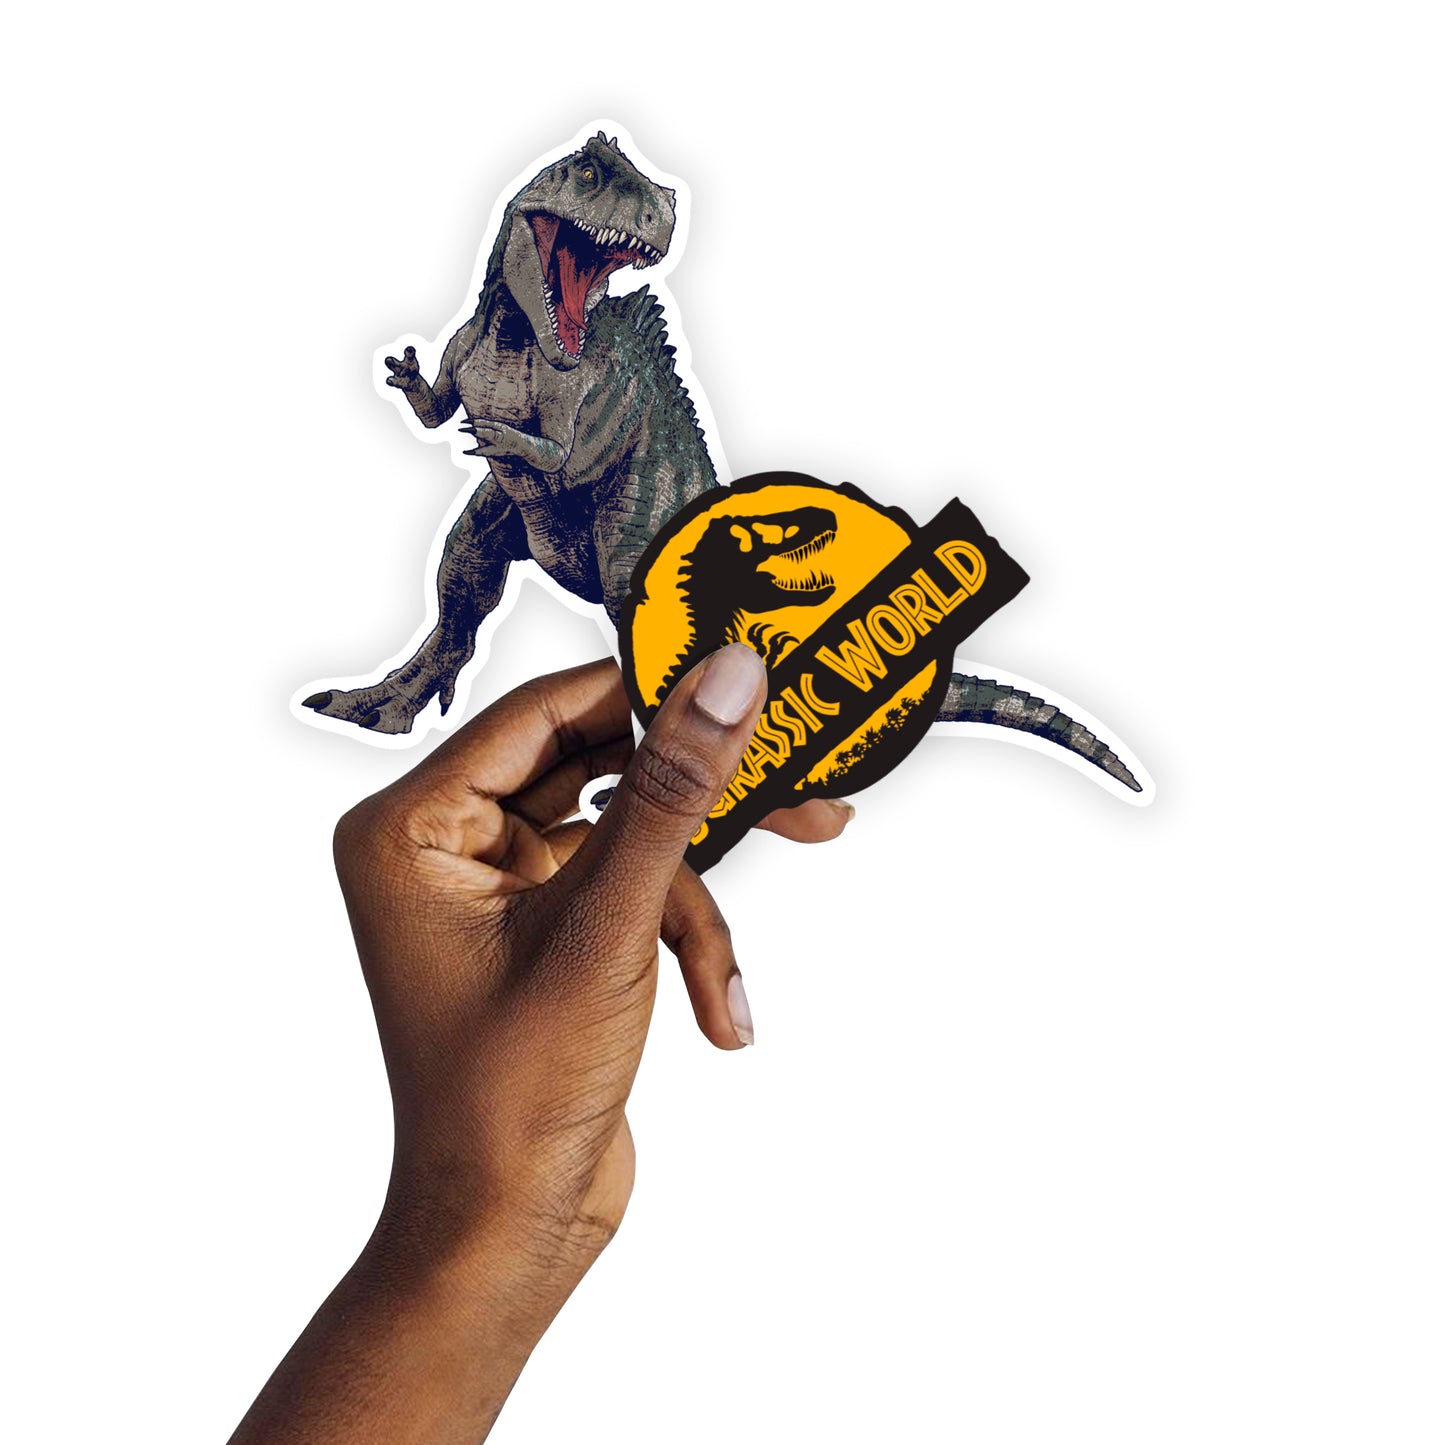 Sheet of 5 -Jurassic World Dominion: Giganotosaurus Minis - Officially Licensed NBC Universal Removable Adhesive Decal